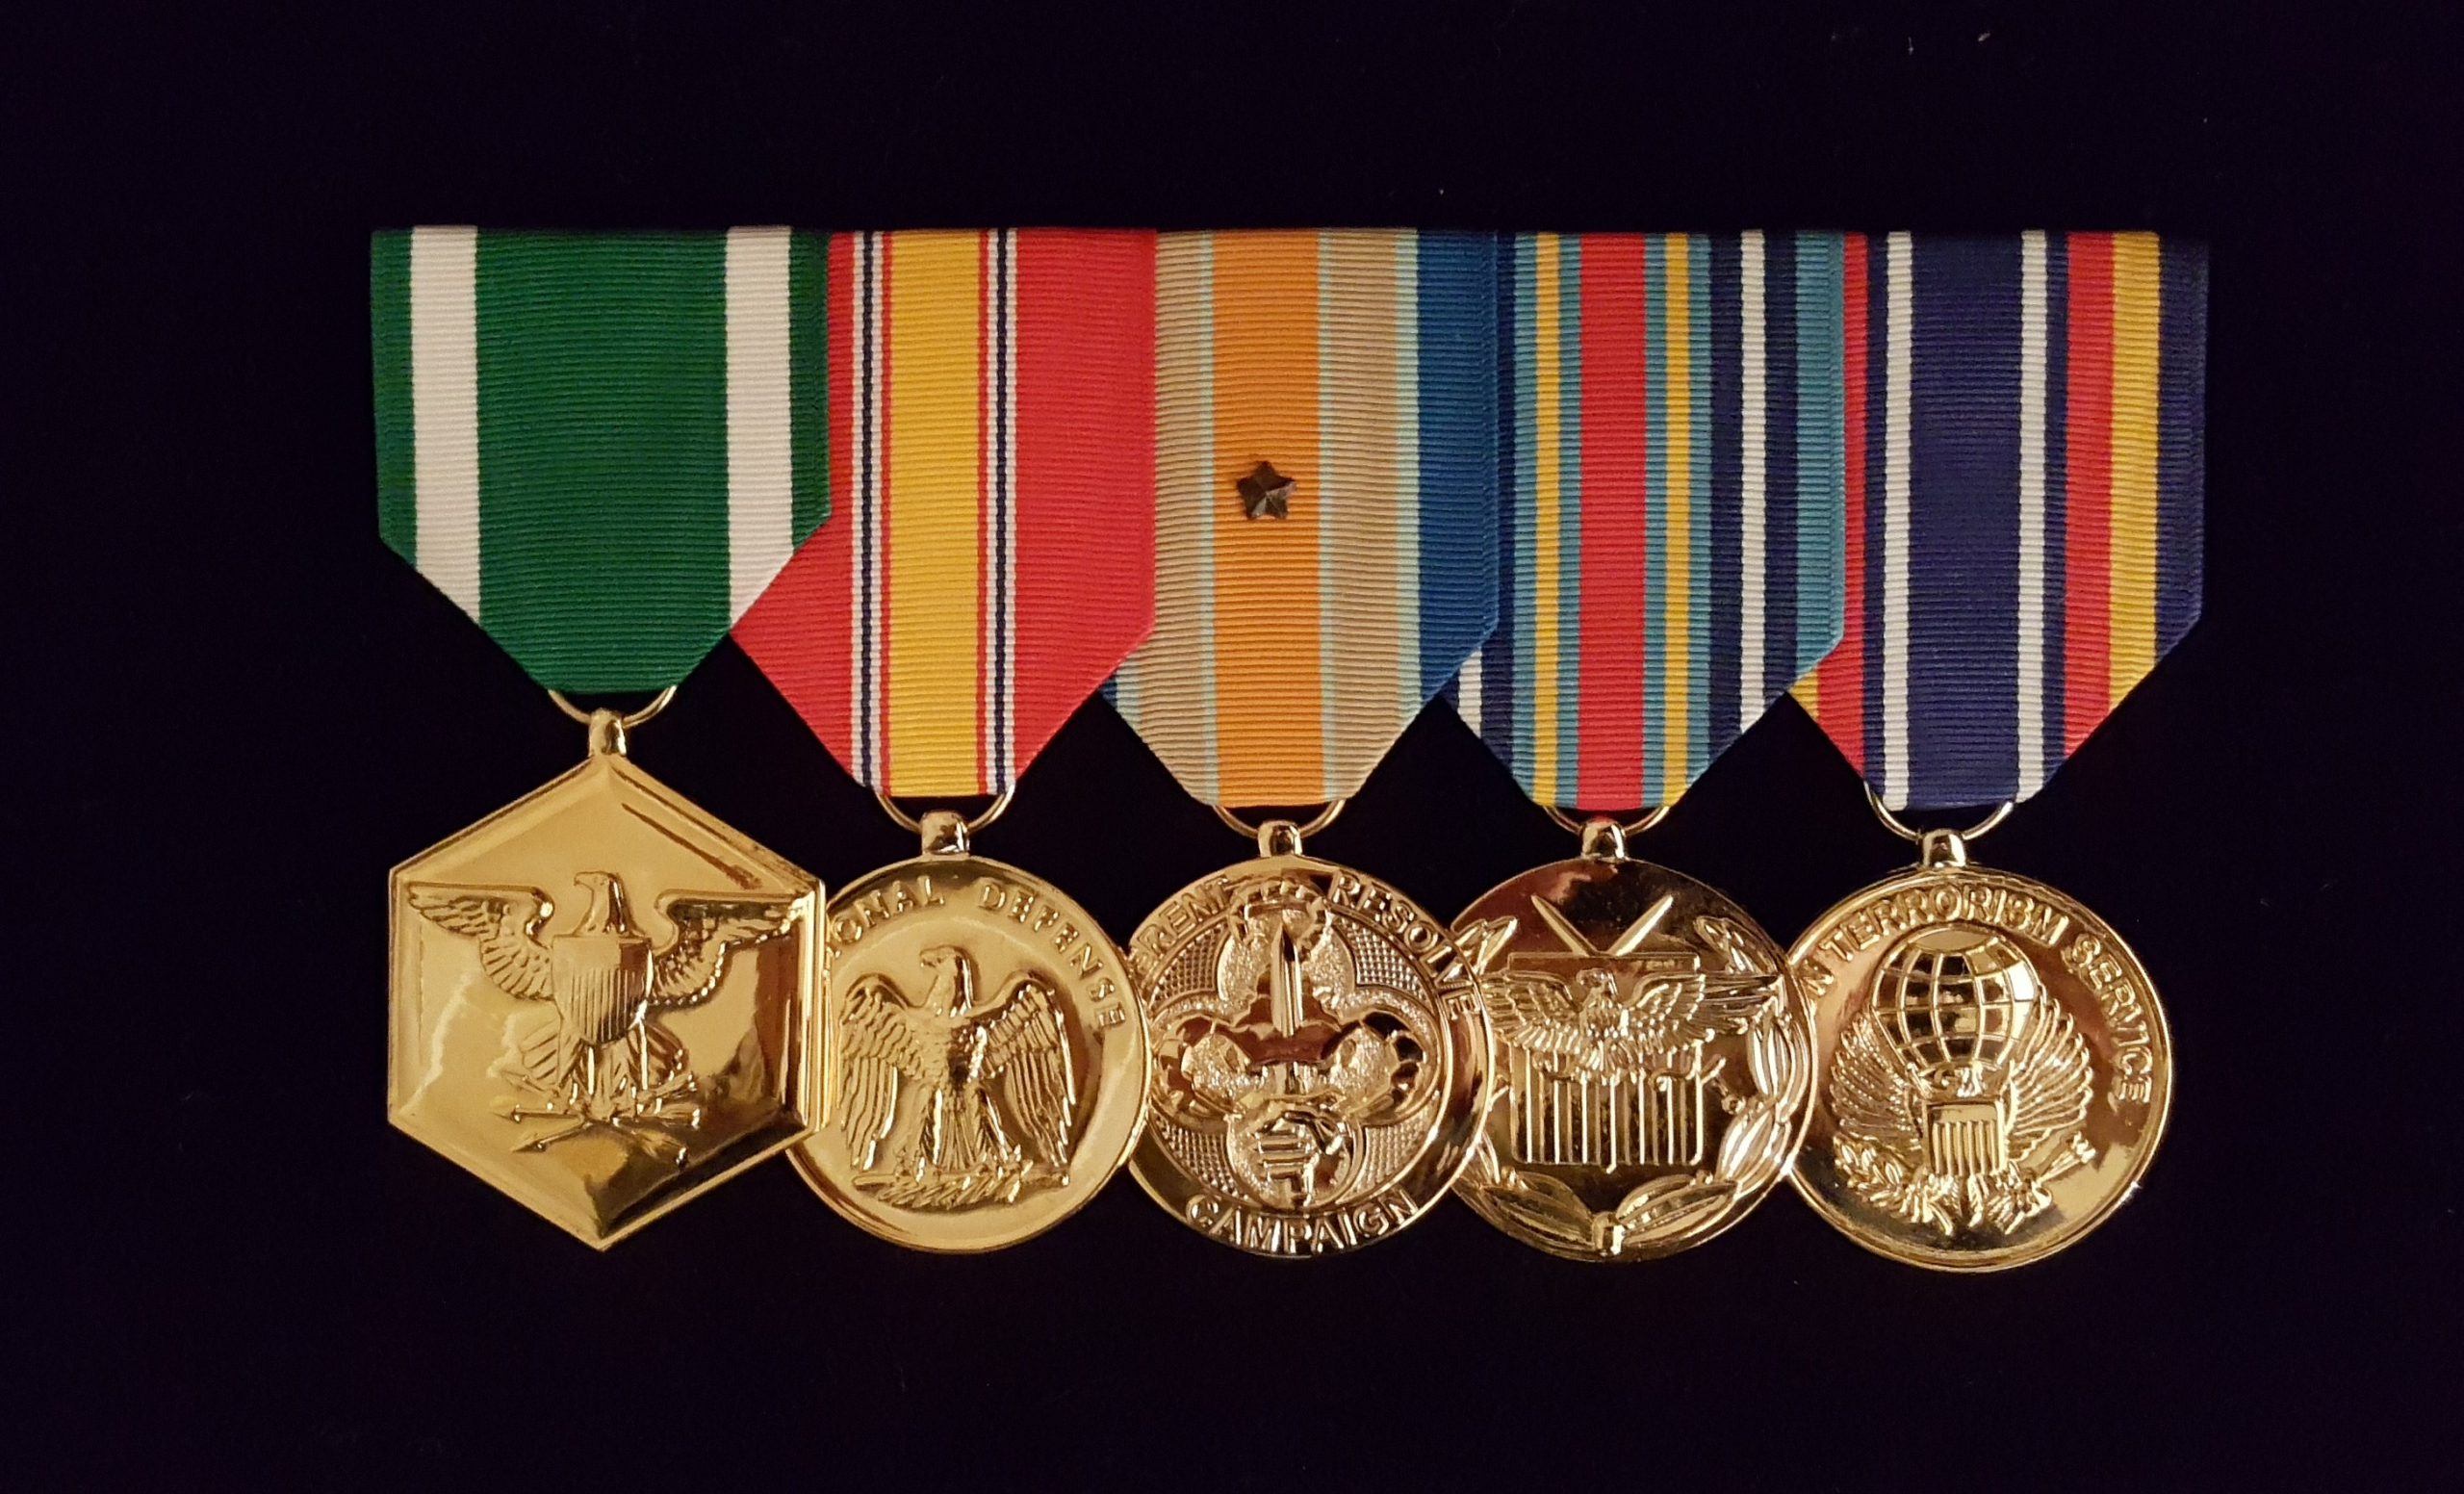 Five Star Medals - The Marine Shop